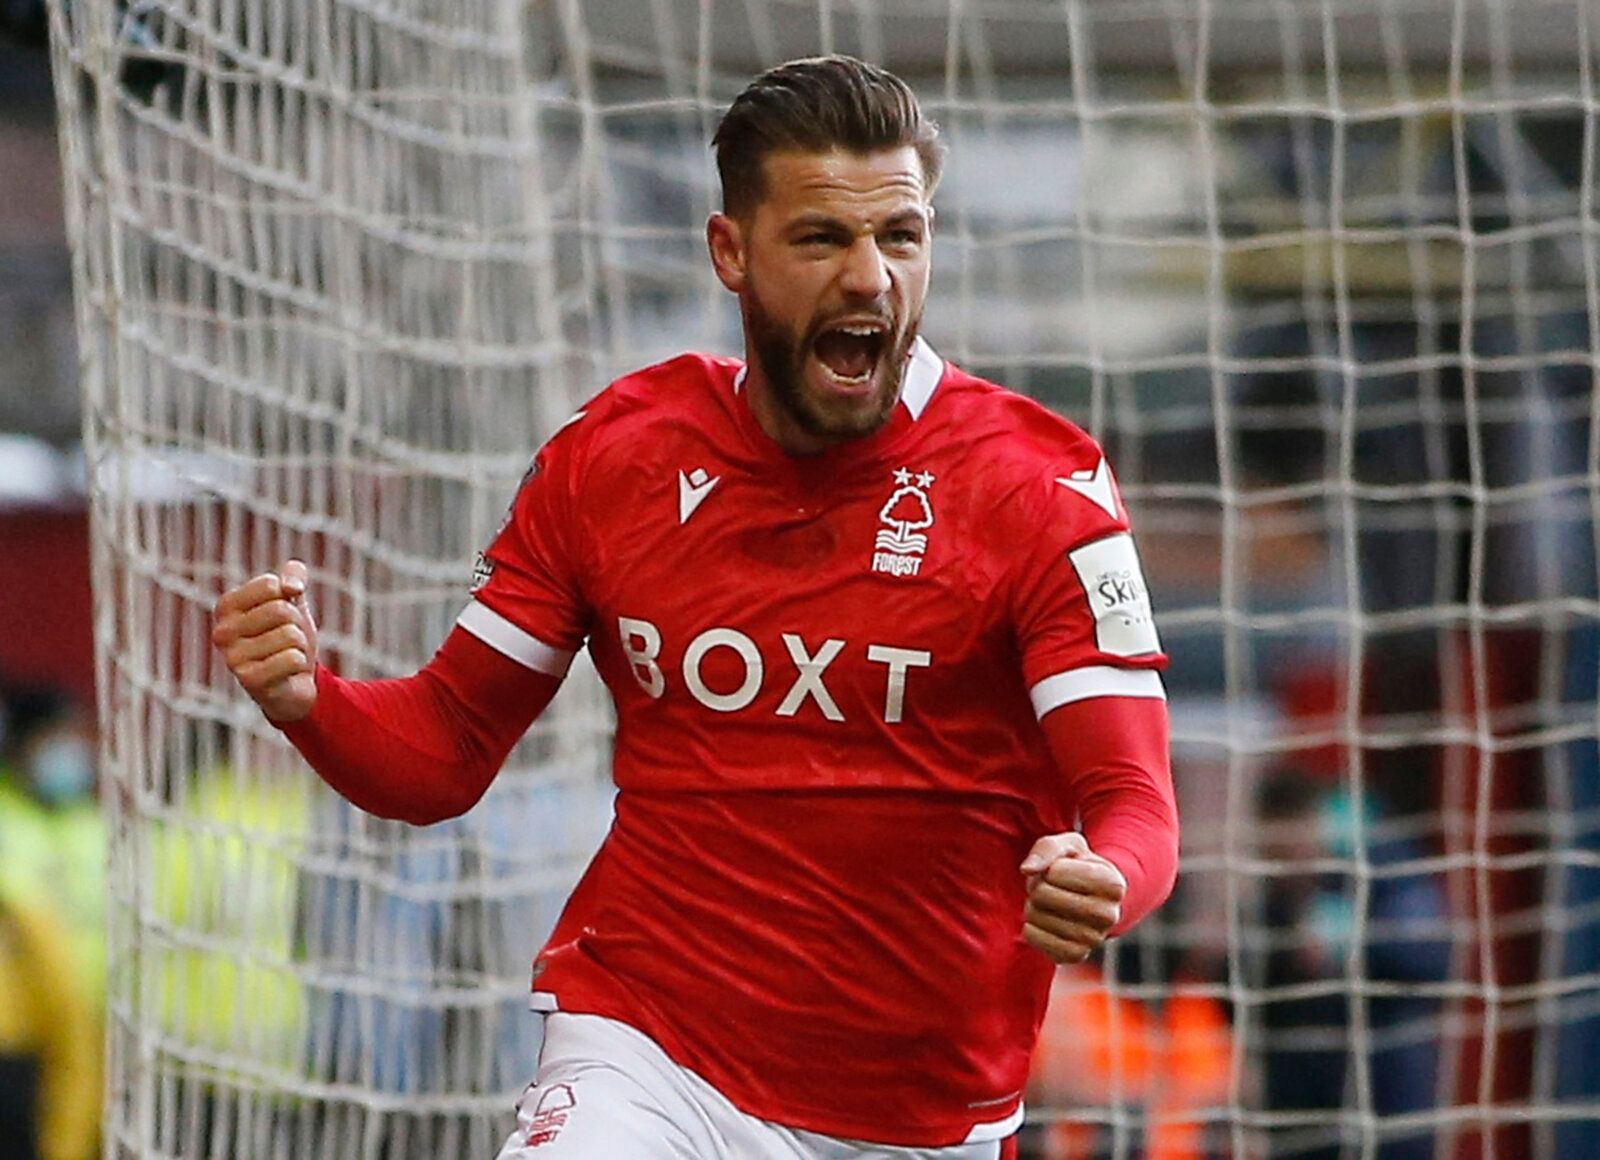 Soccer Football - FA Cup - Fourth Round - Nottingham Forest v Leicester City - The City Ground, Nottingham, Britain - February 6, 2022 Nottingham Forest's Philip Zinckernagel celebrates scoring their first goal REUTERS/Craig Brough